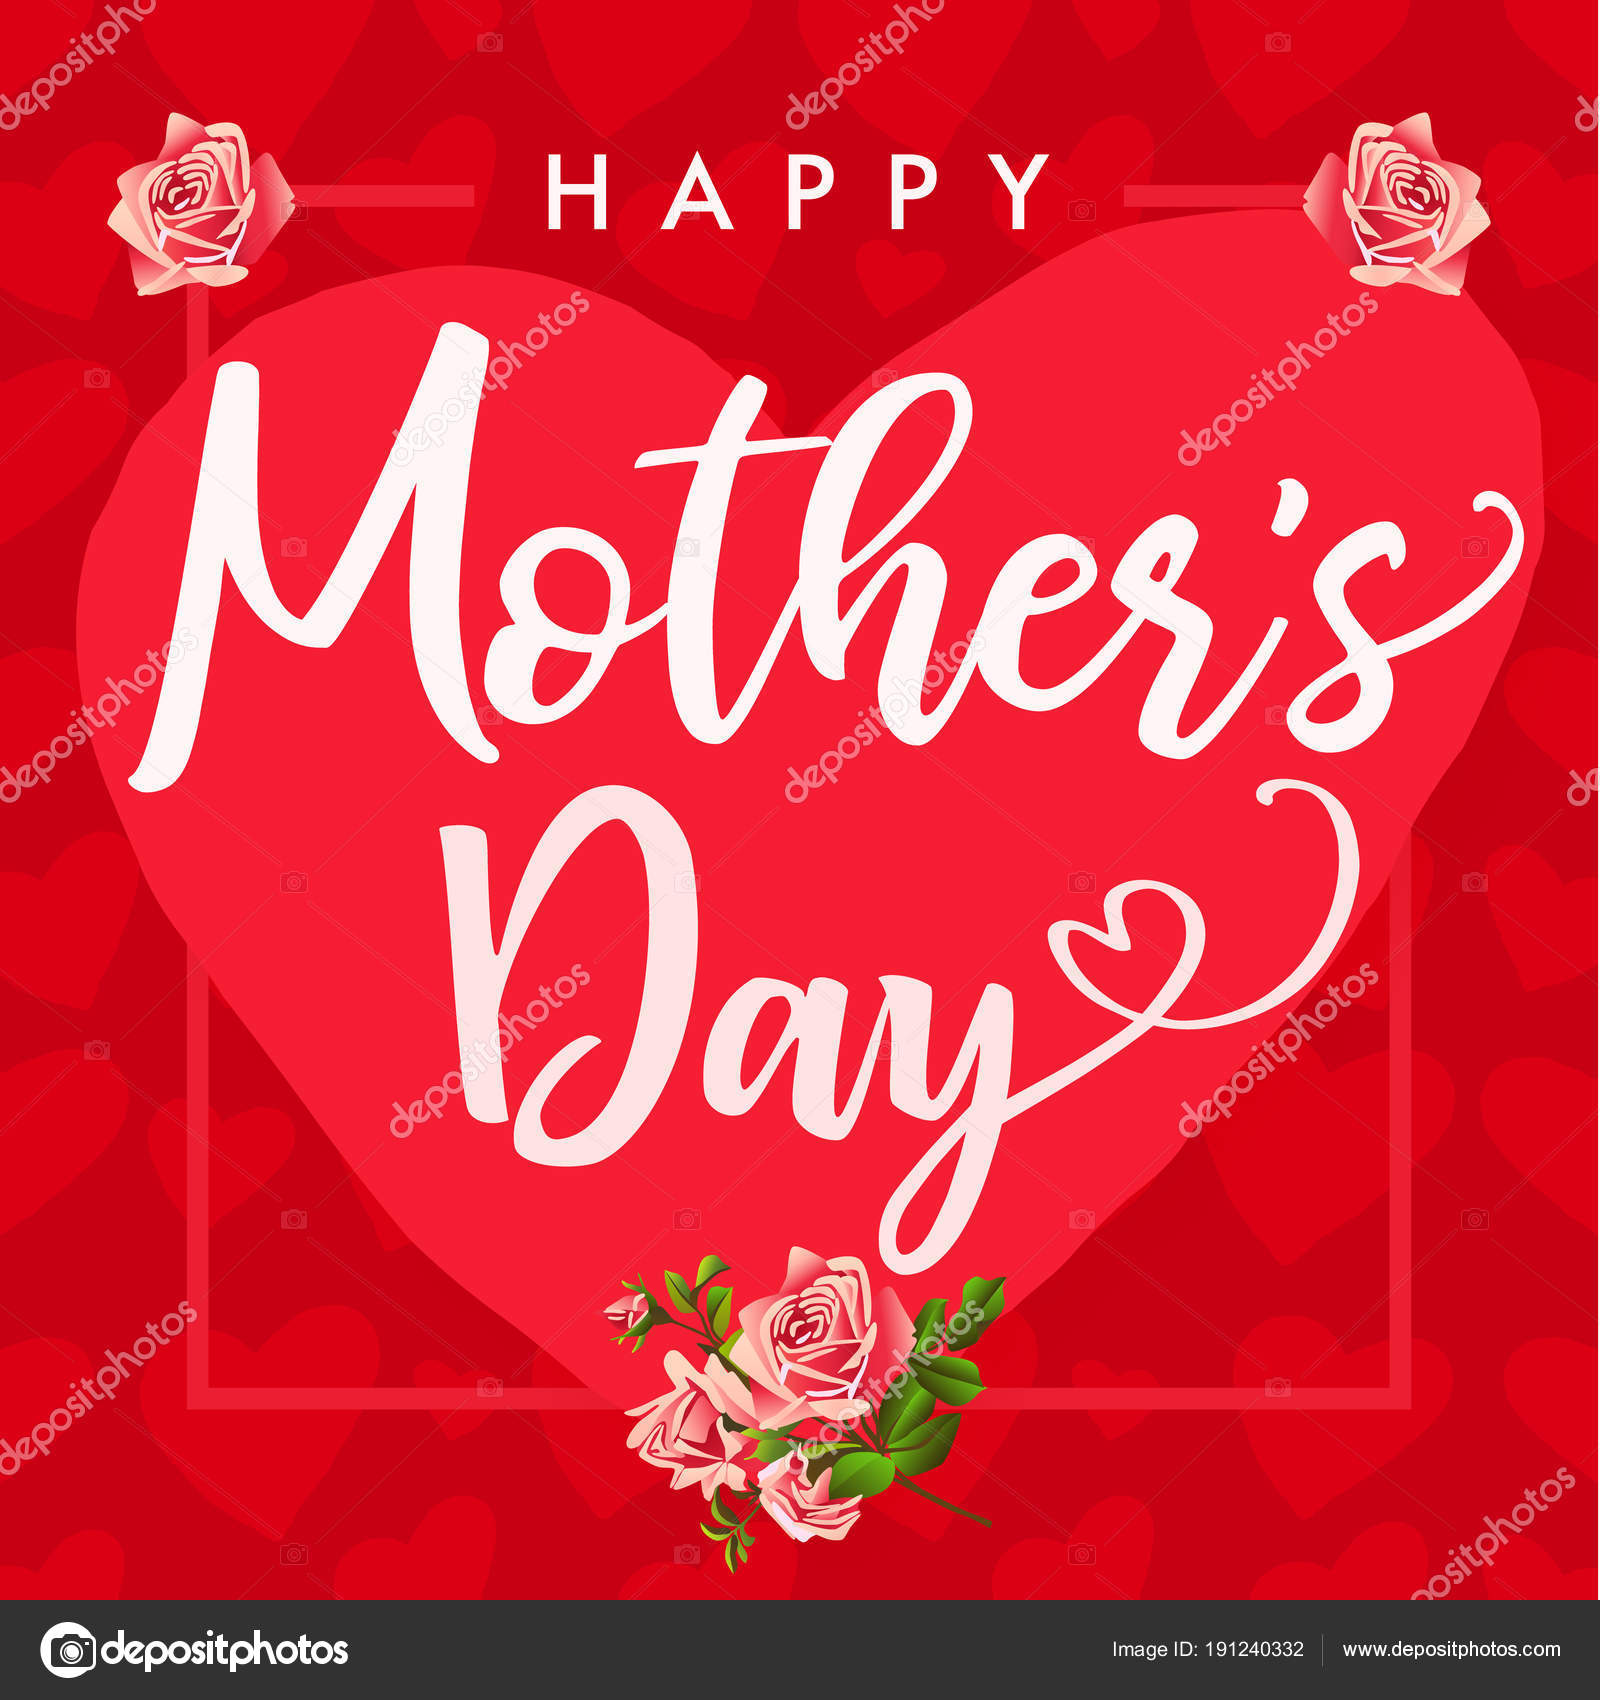 Download Happy Mother Day Roses Flower Hearts Red Banner Elegant ...